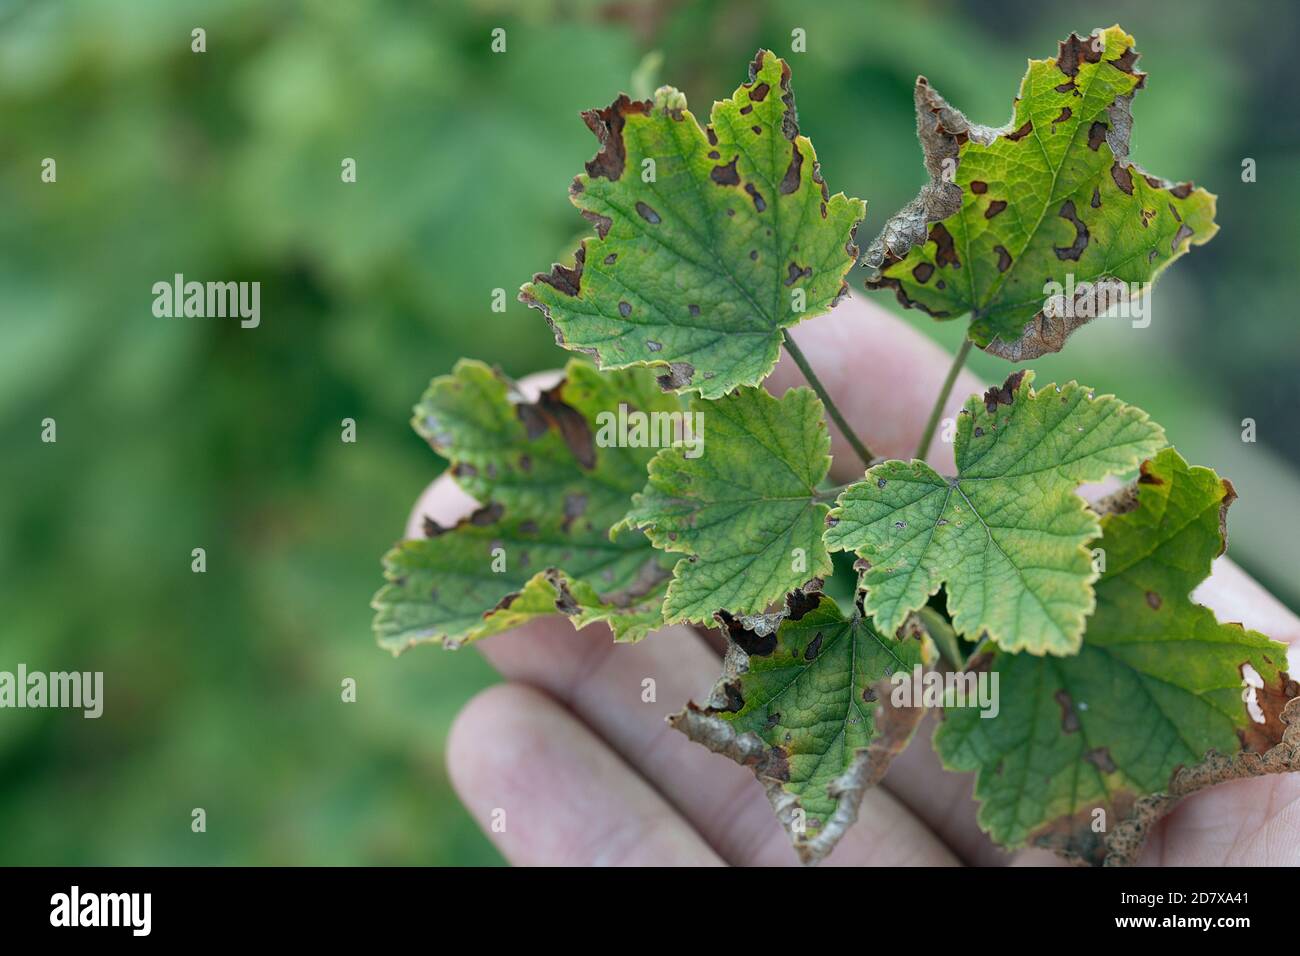 fungal disease Anthracnose on black currant leaves in form of brown spots. Stock Photo